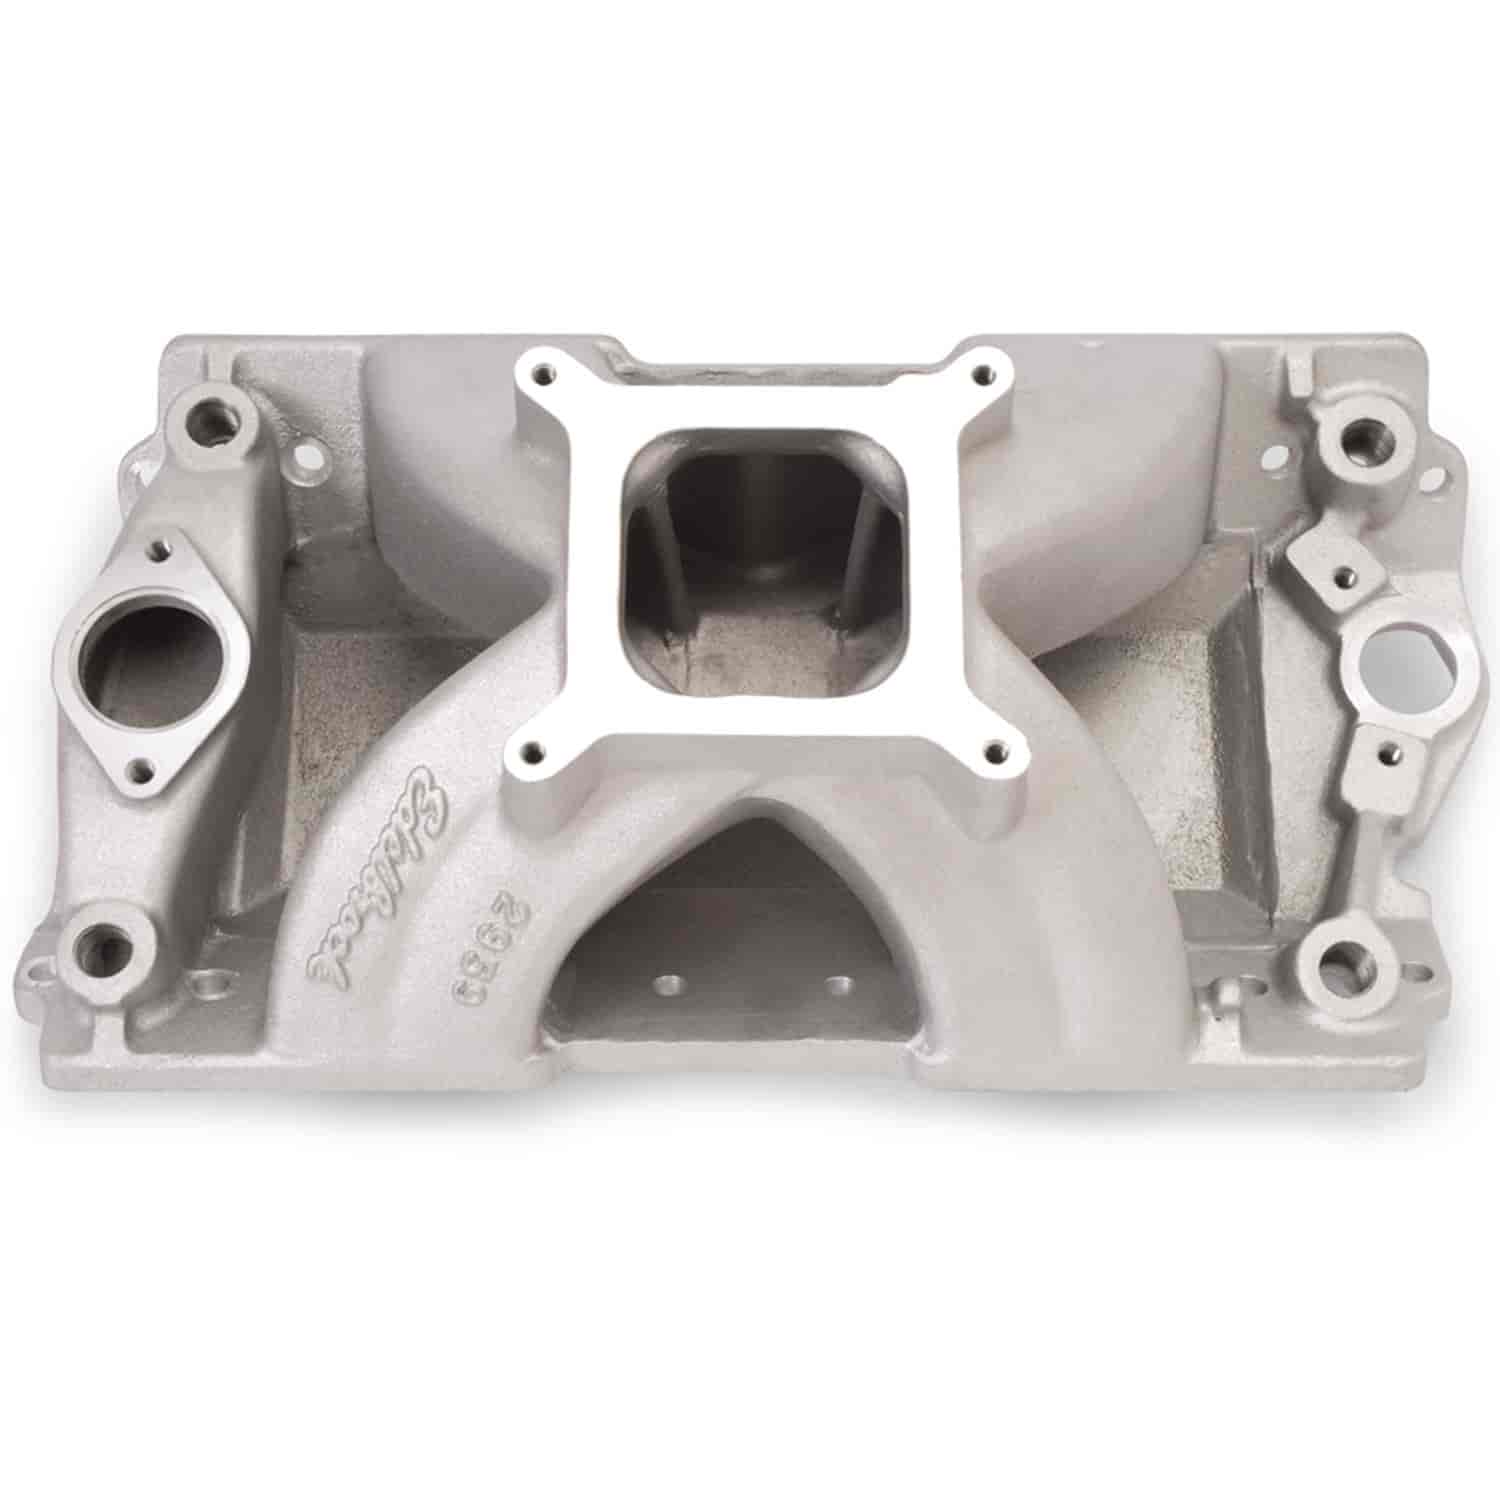 Victor 18° Intake Manifold One-Piece Design for Small Block Chevy